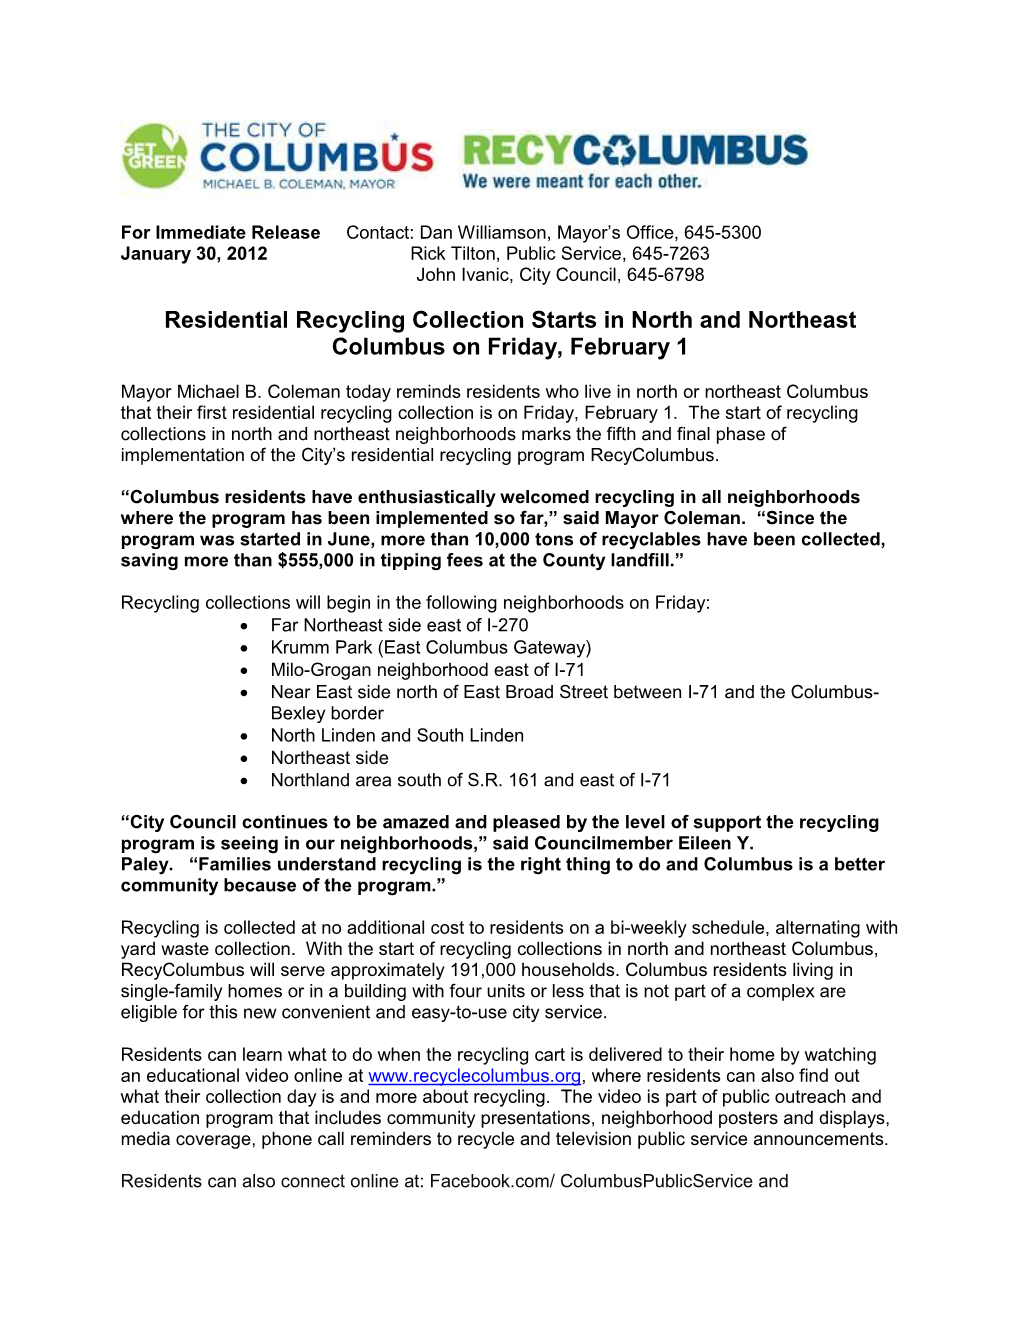 Residential Recycling Collection Starts in North and Northeast Columbus on Friday, February 1